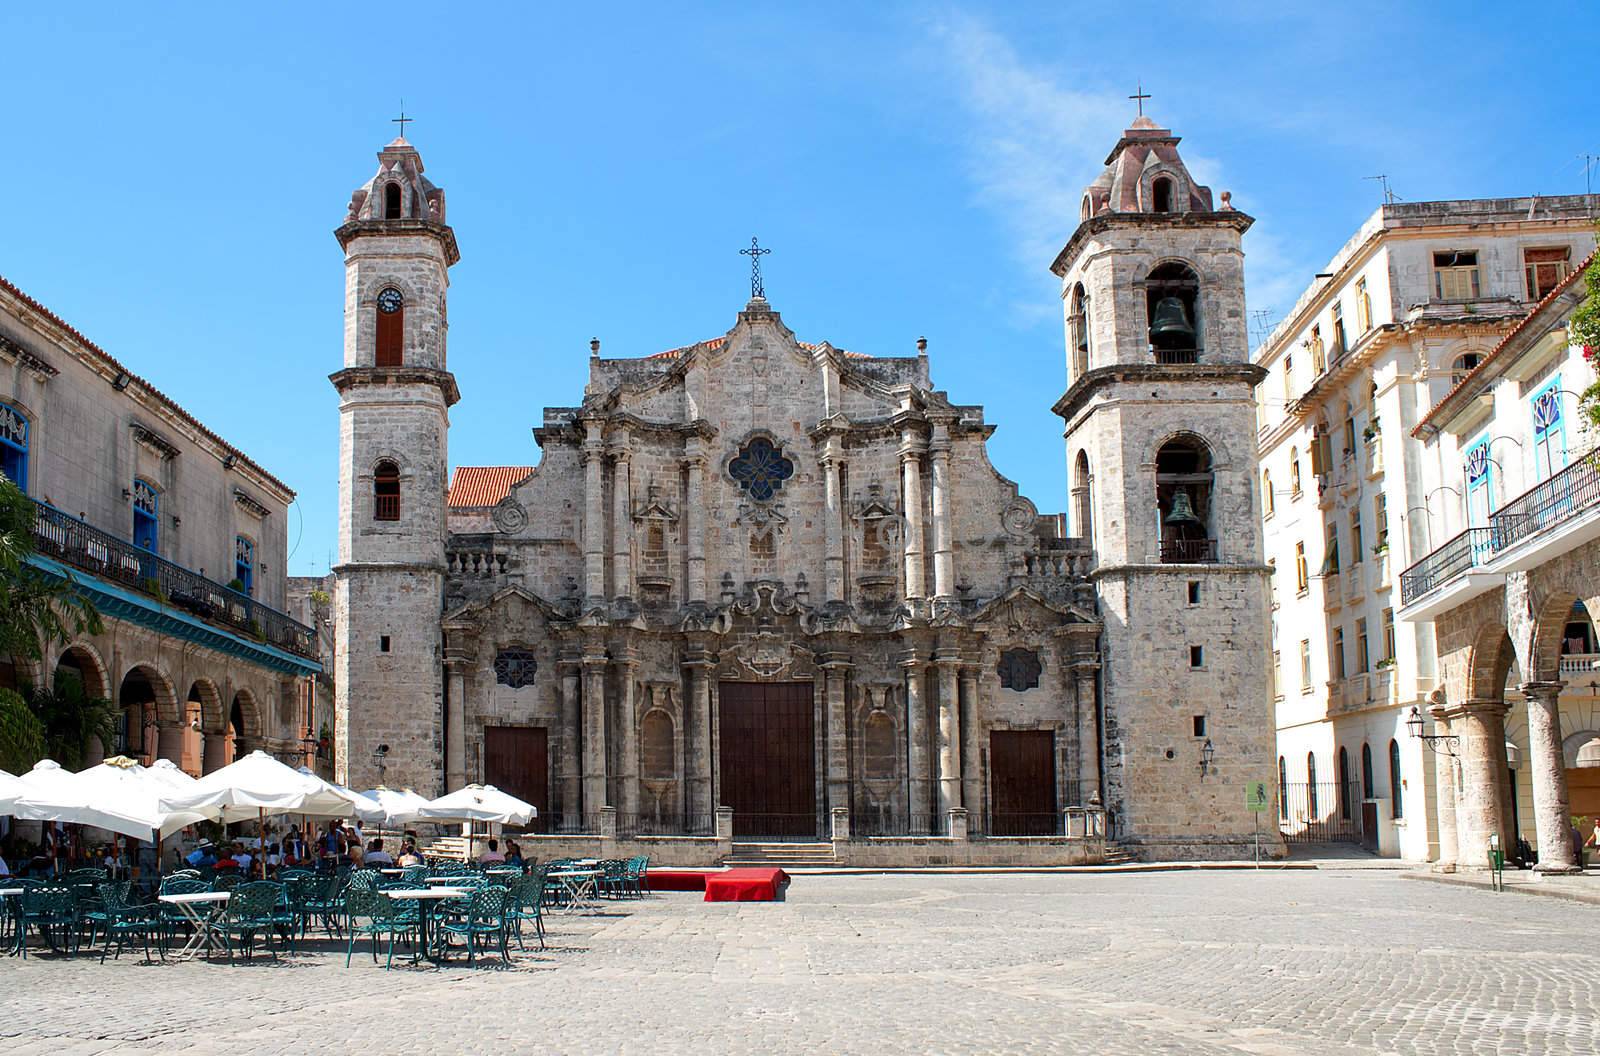 The Havana Cathedral and its adjacent square in Cuba